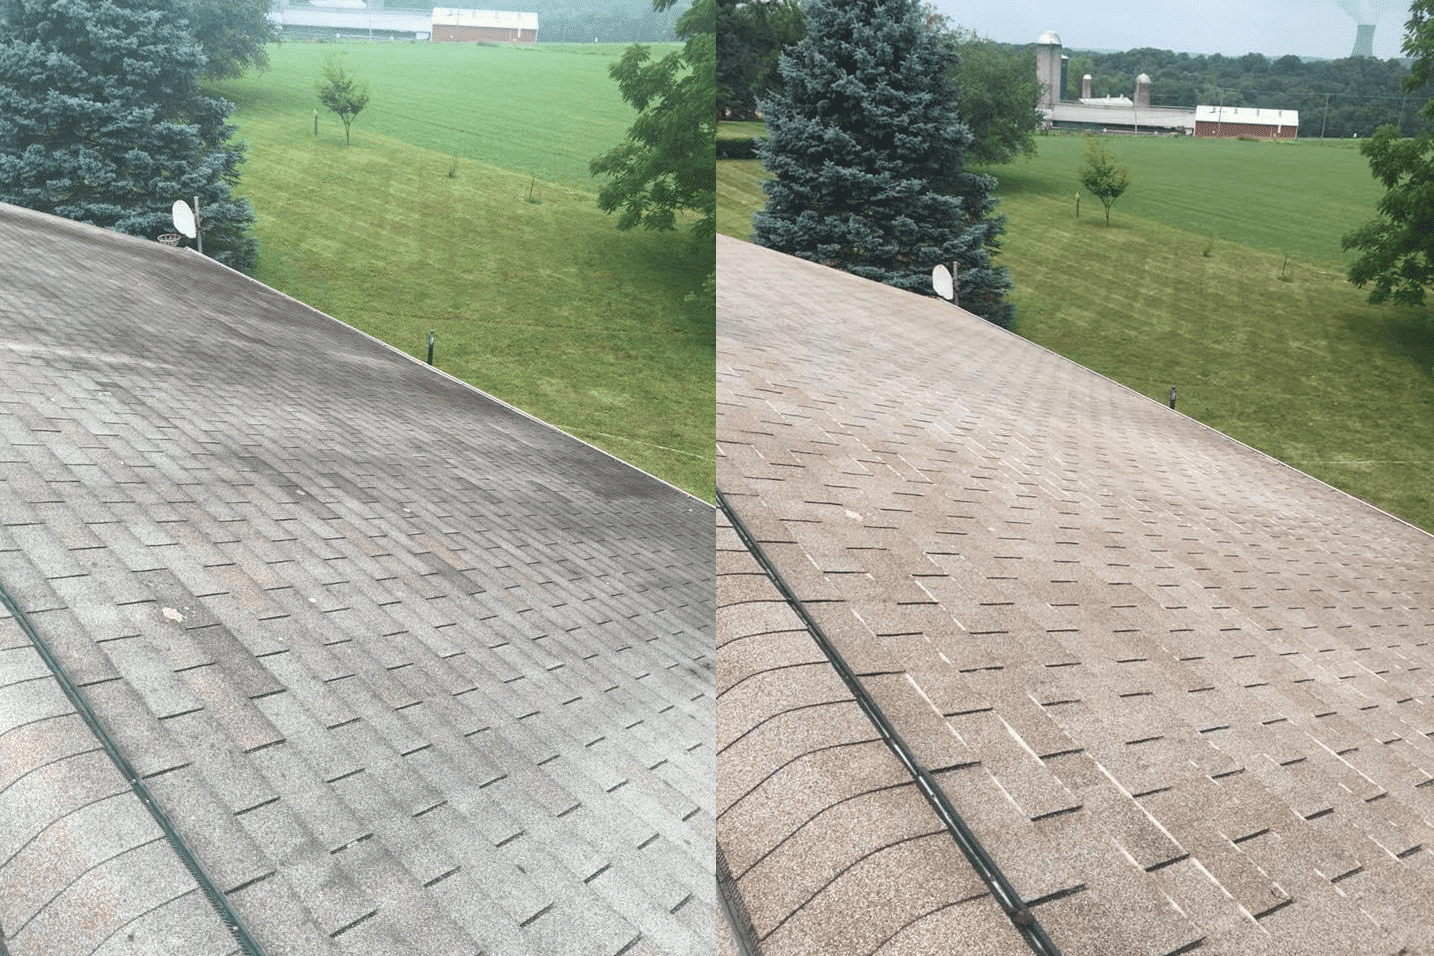 Soft Wash Roofing Before and After - A visual comparison of a roof before and after a soft wash treatment.